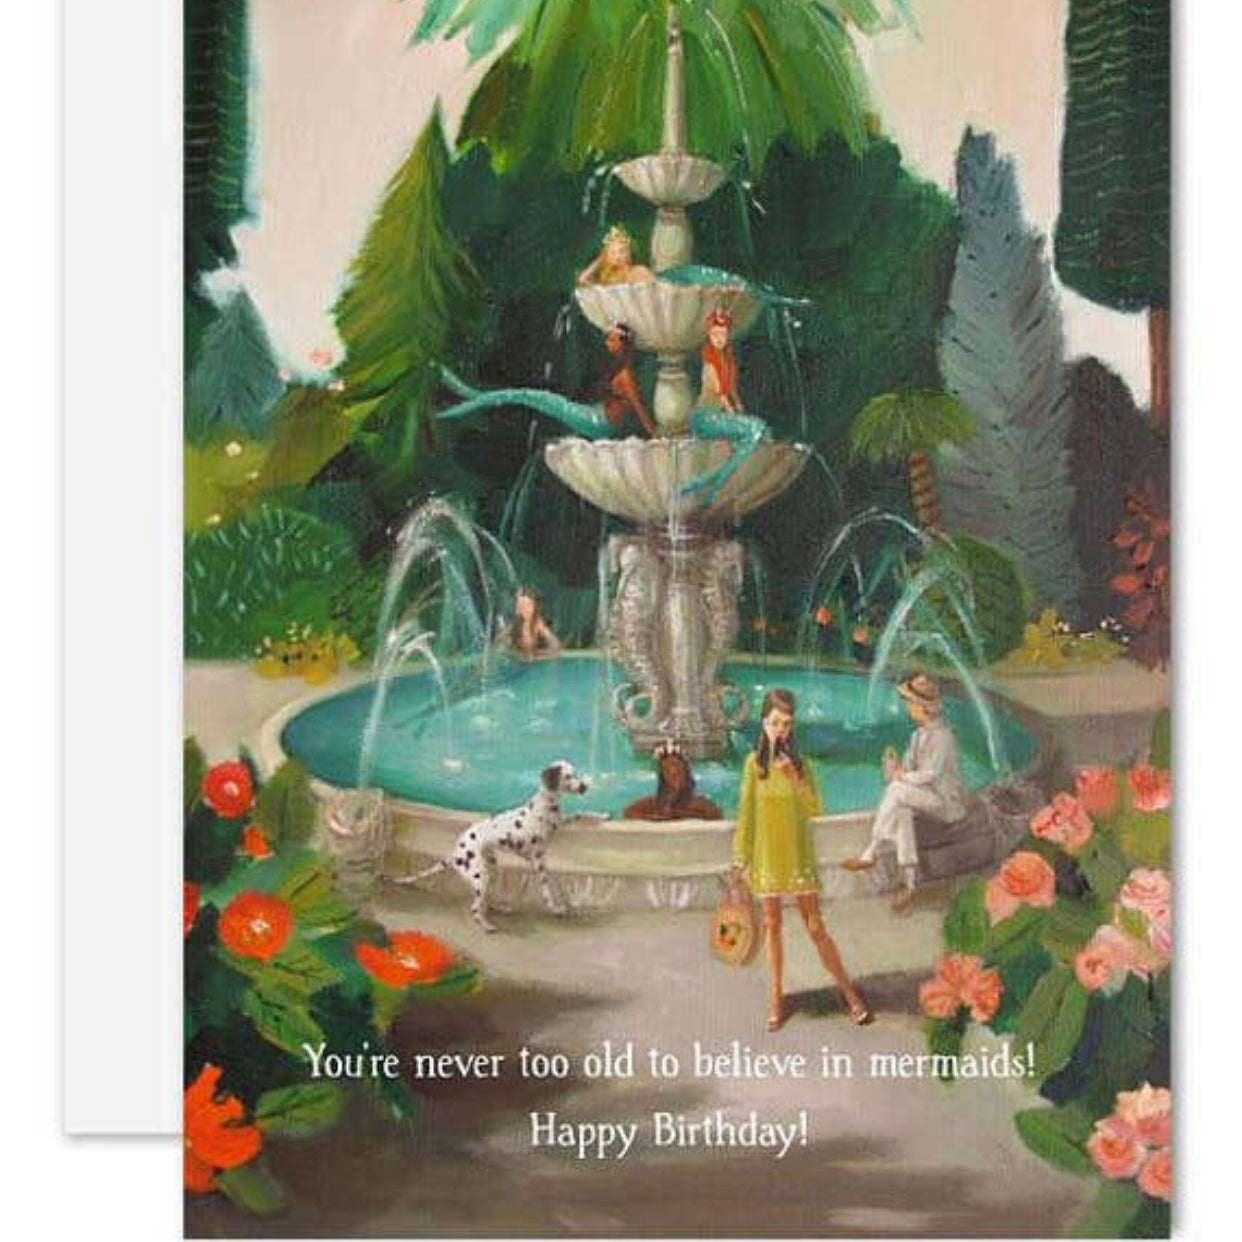 You're never too old to believe in mermaid happy birthday greeting card